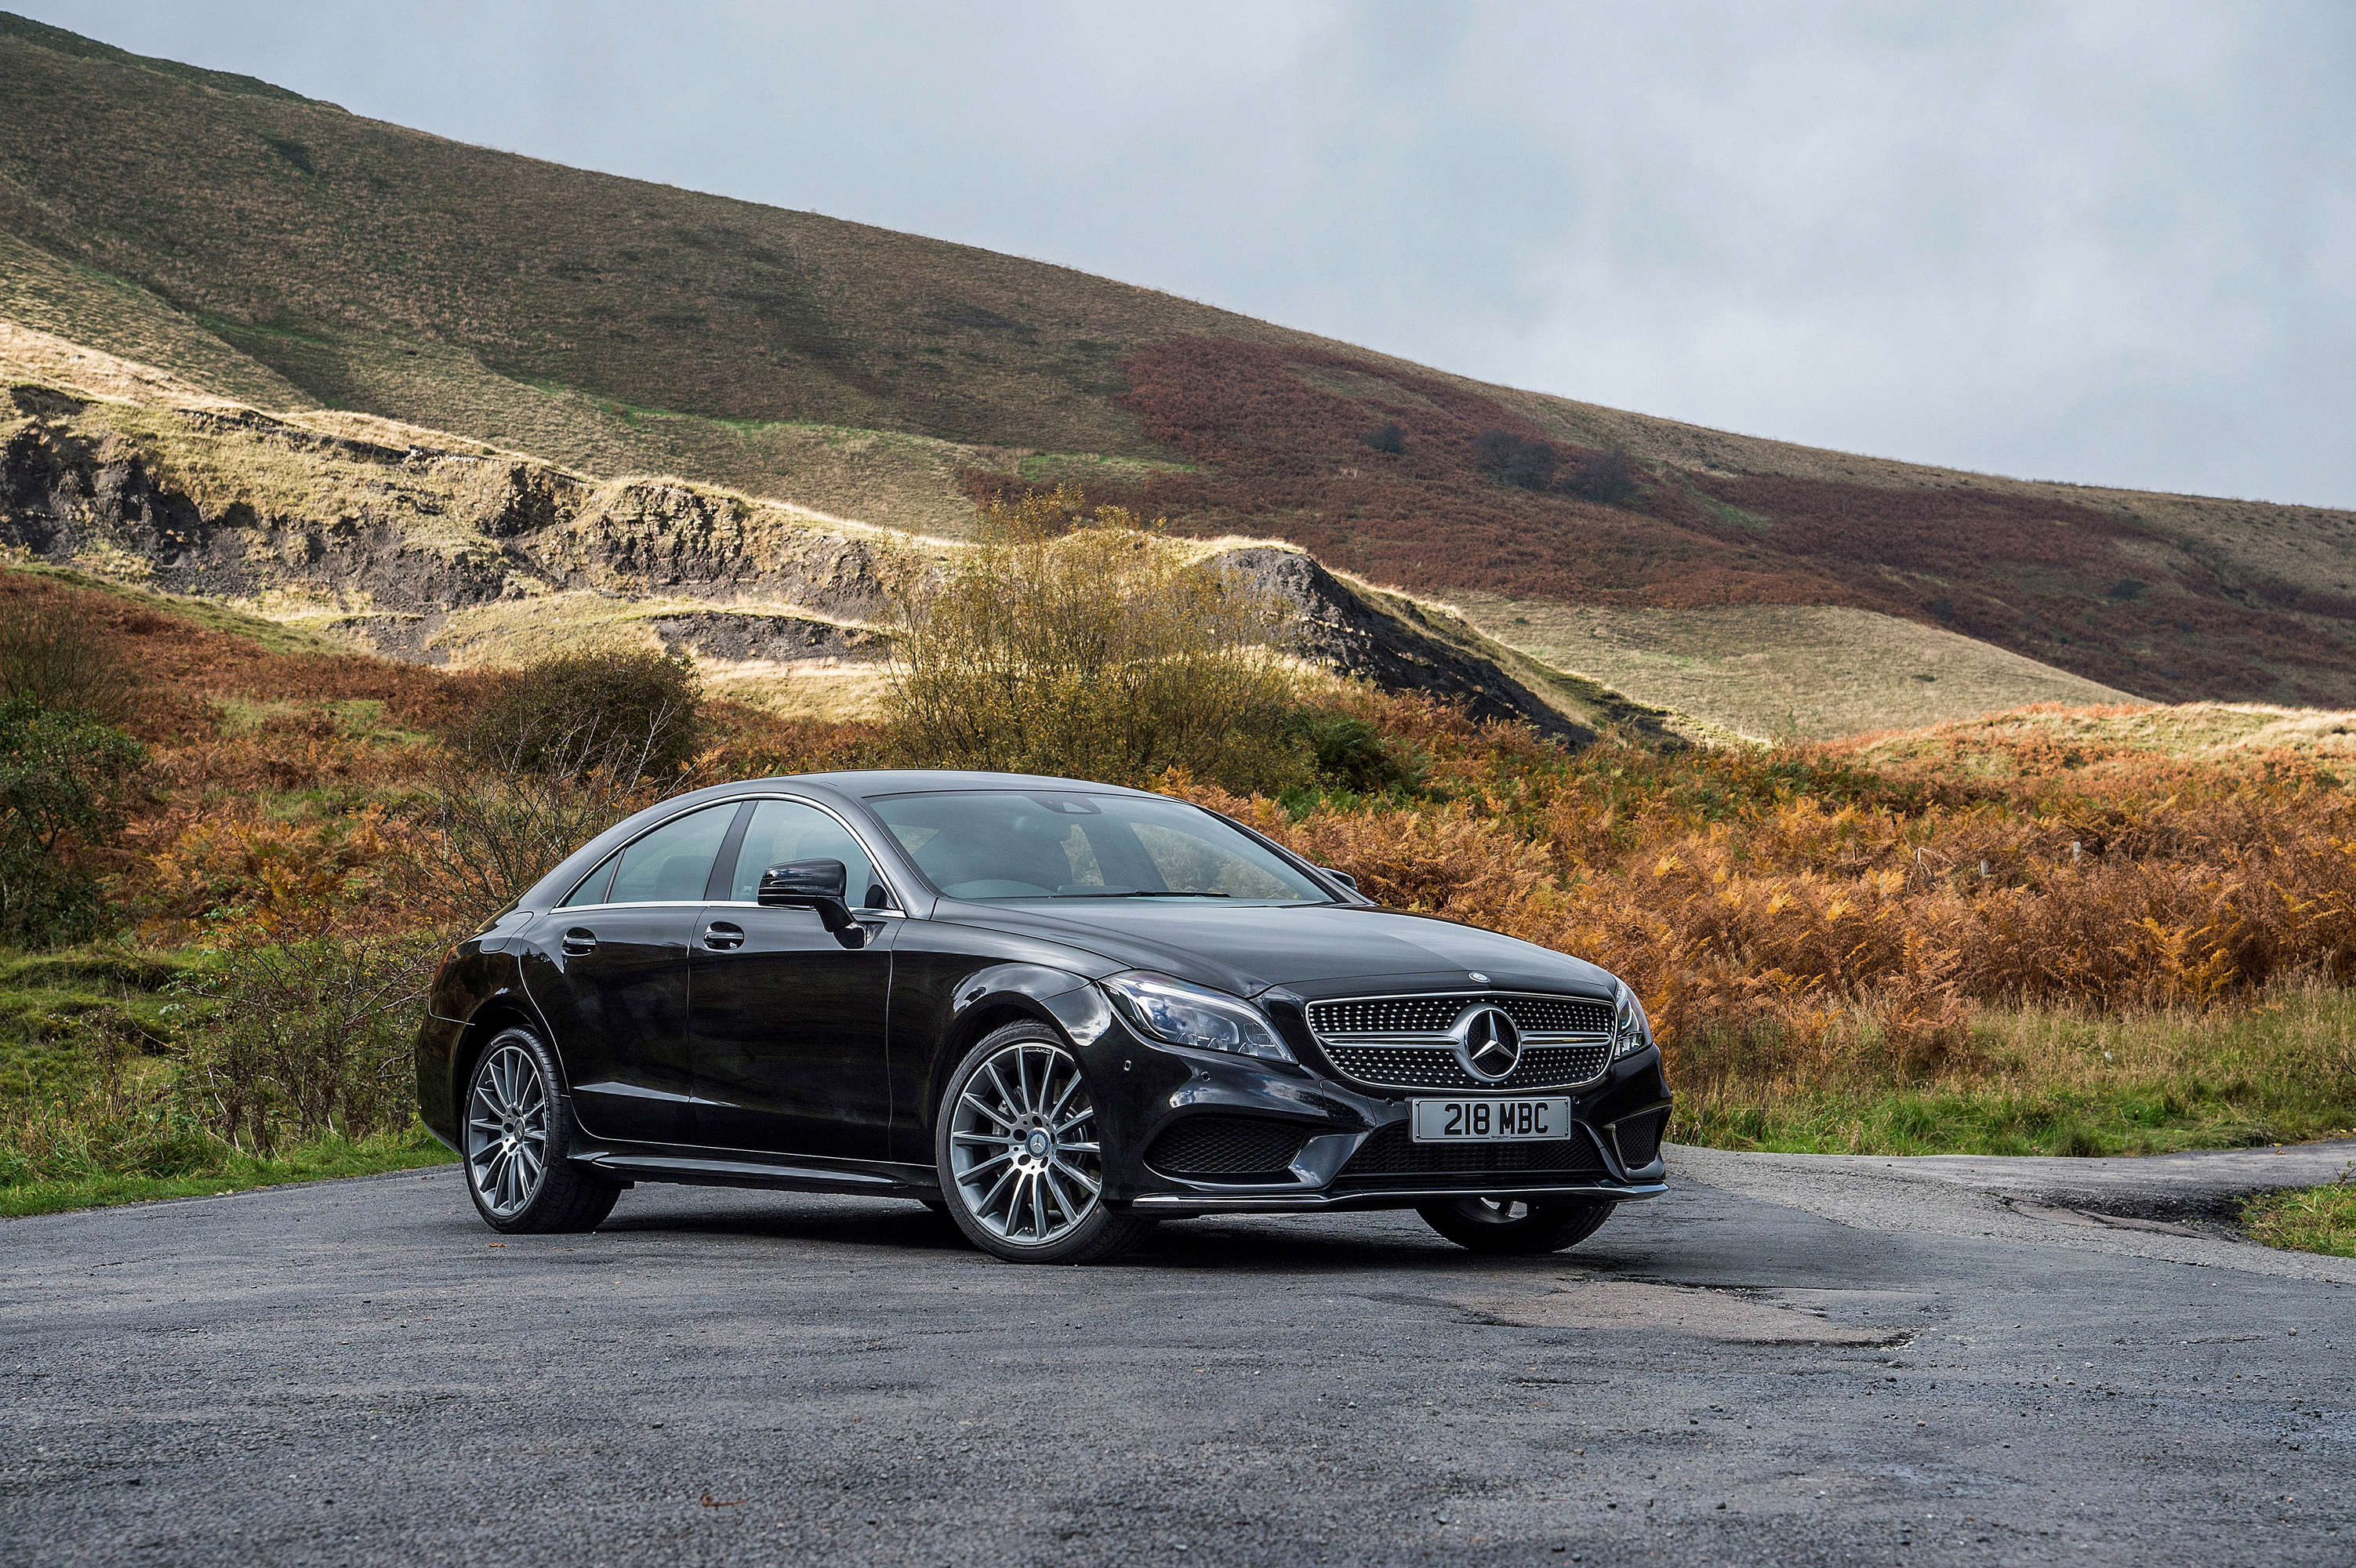 Cool Backgrounds black, cars, side view, cls 350 Mercedes-Benz